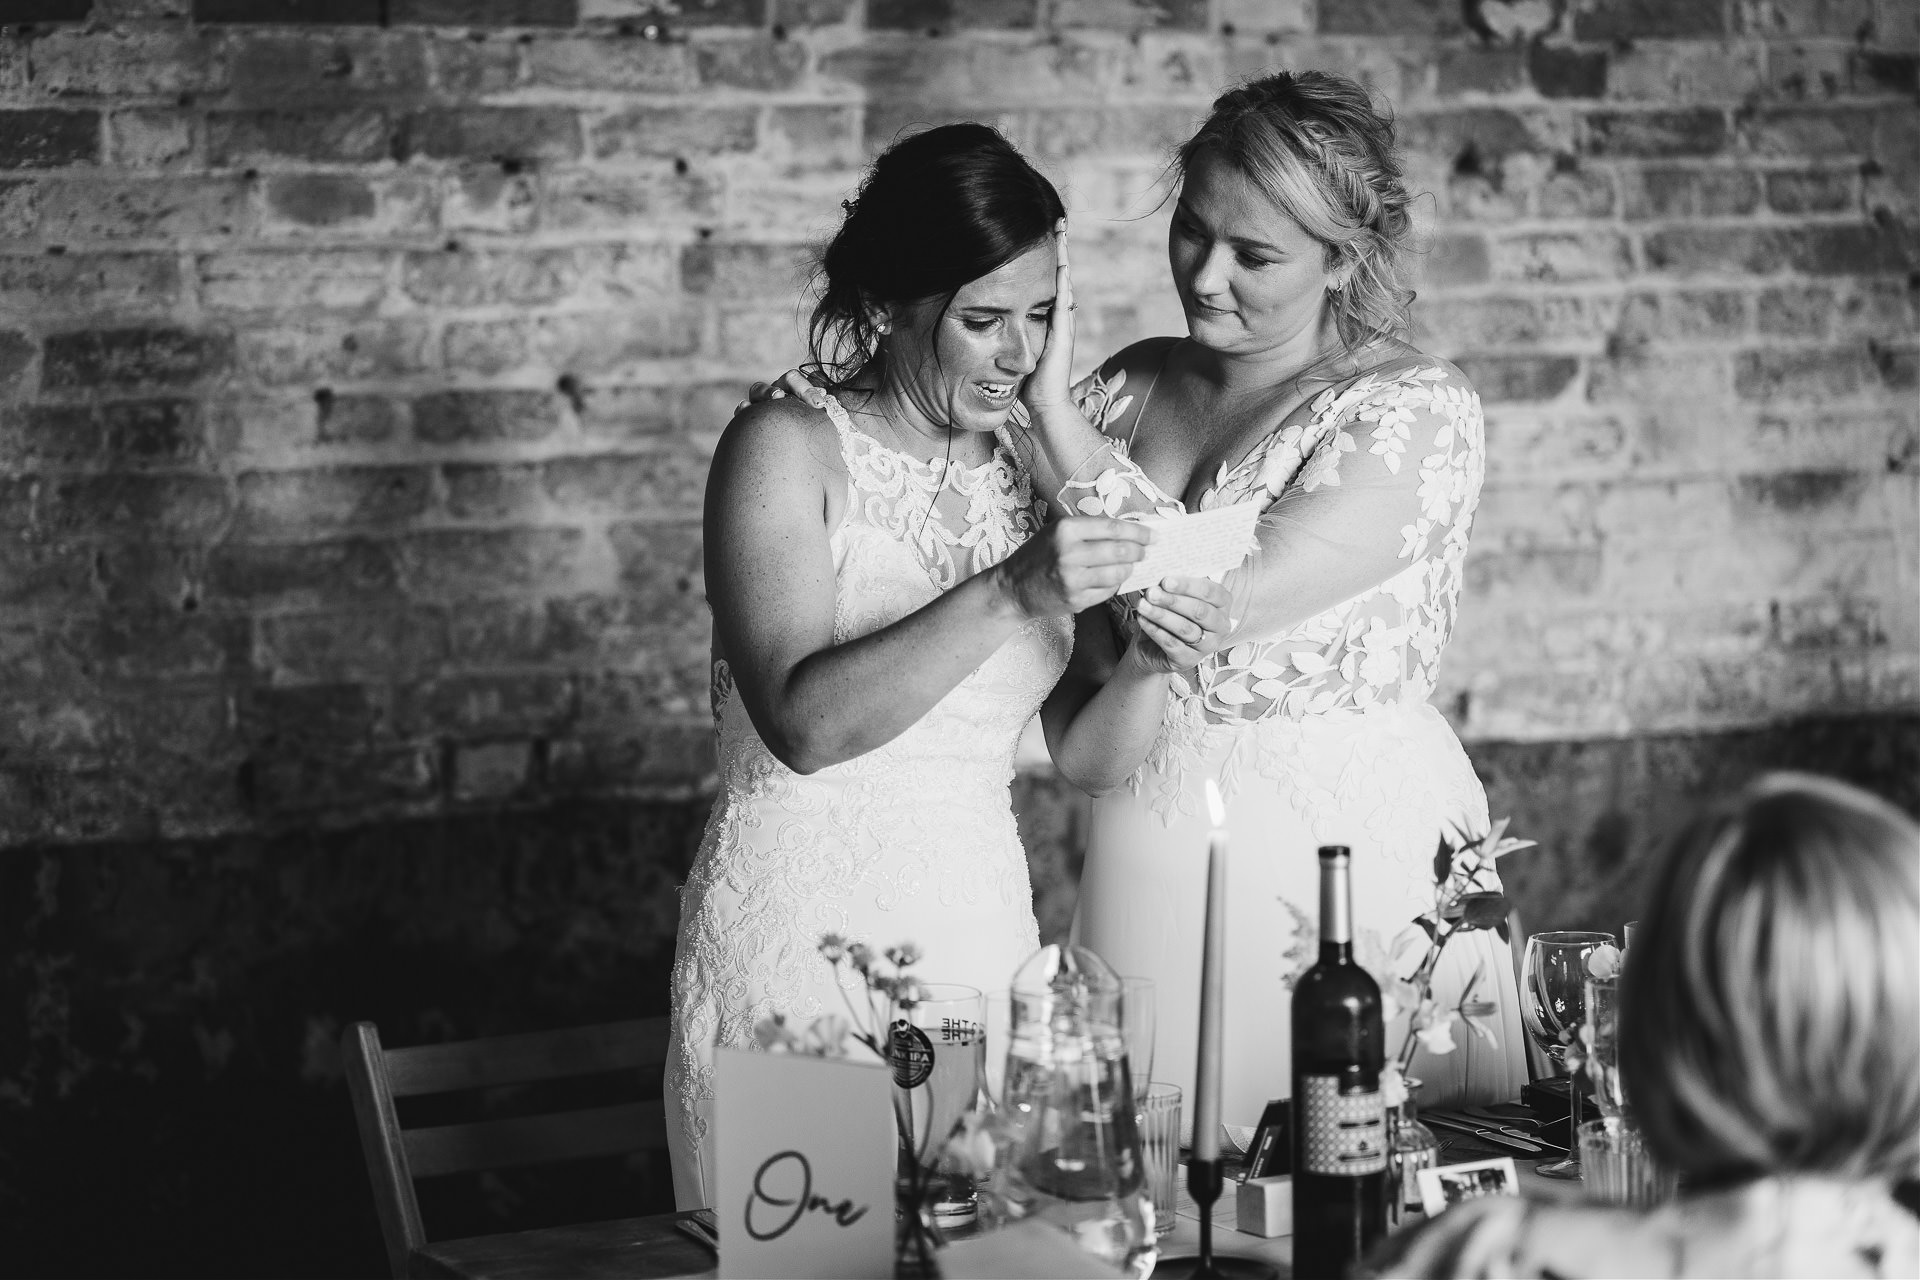 Bride holding her wife with a supportive hand on her face as she reads an emotional wedding speech